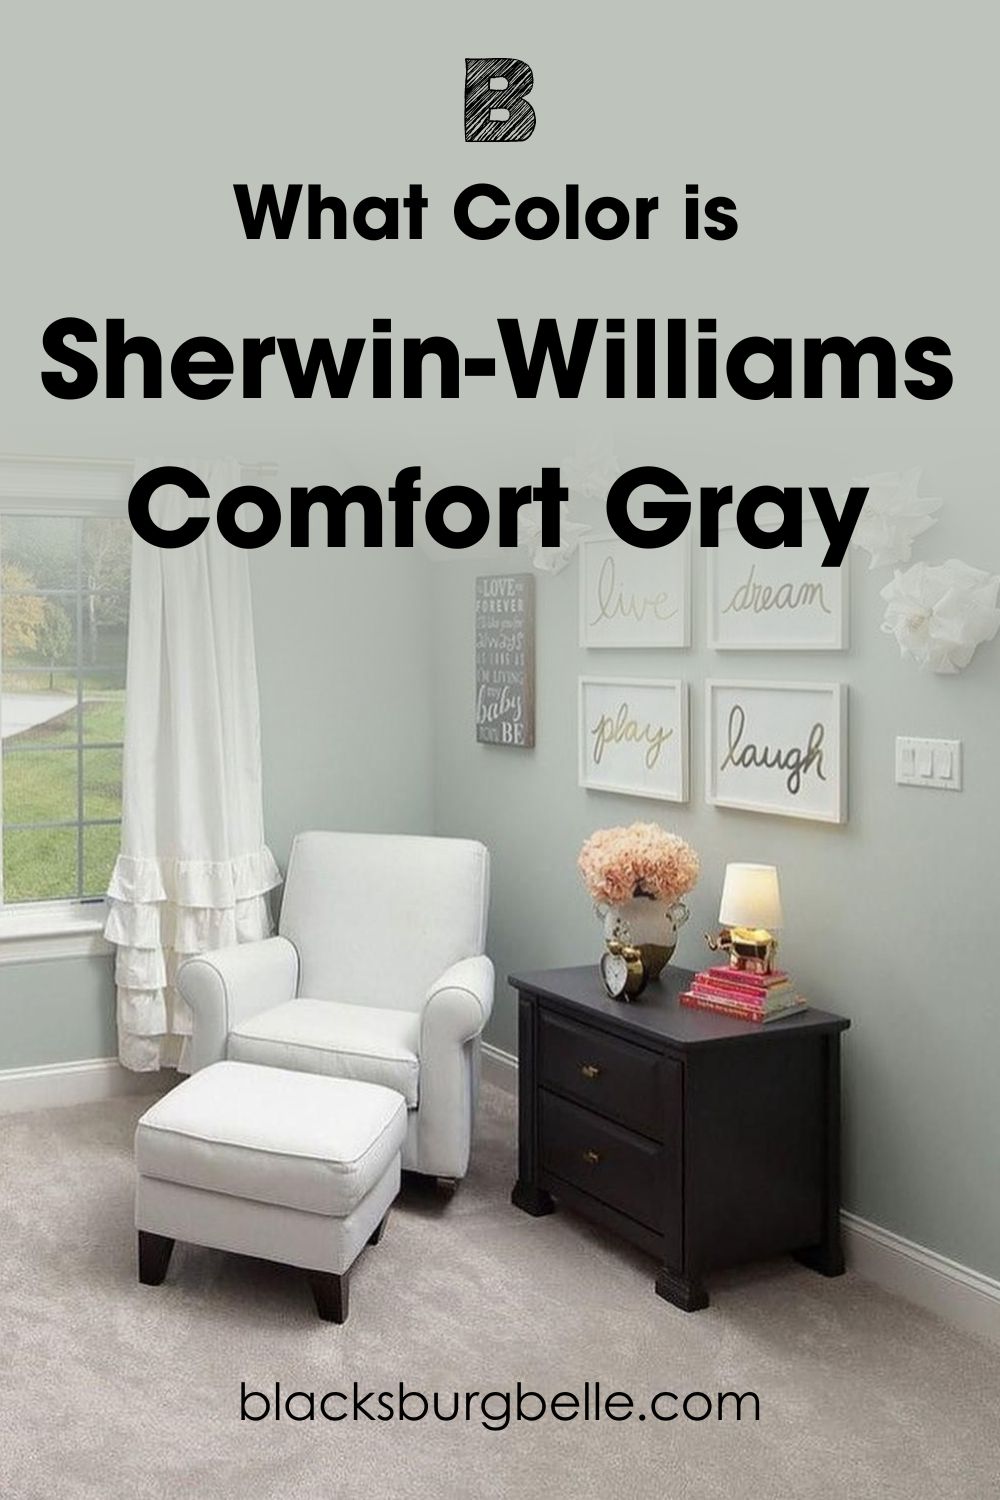 What Color is Sherwin-Williams Comfort Gray